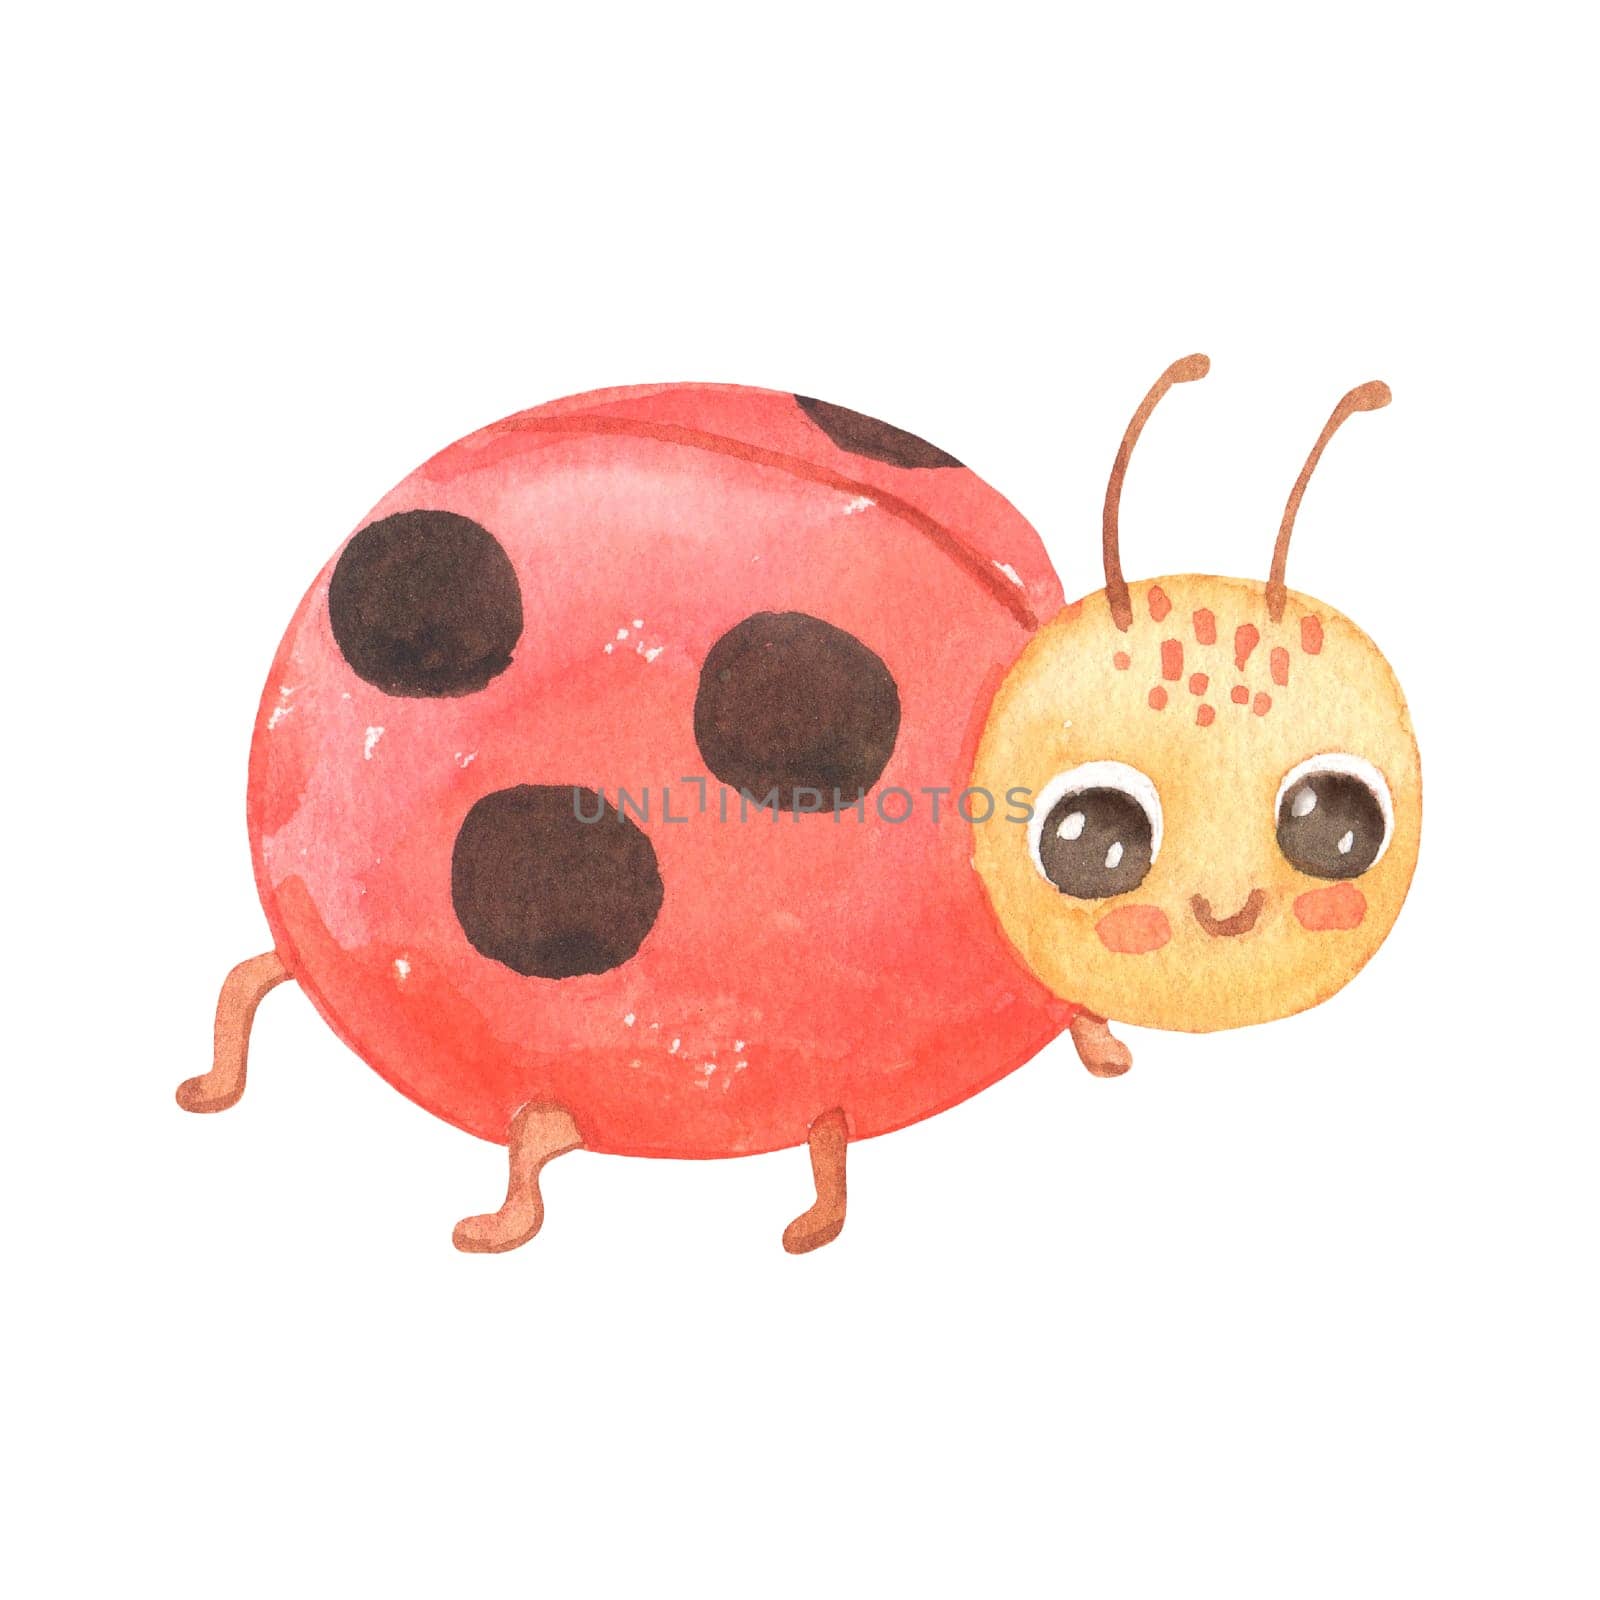 Cute smiling character ladybug isolated on white background. Funny insect for children. Watercolor cartoon illustration